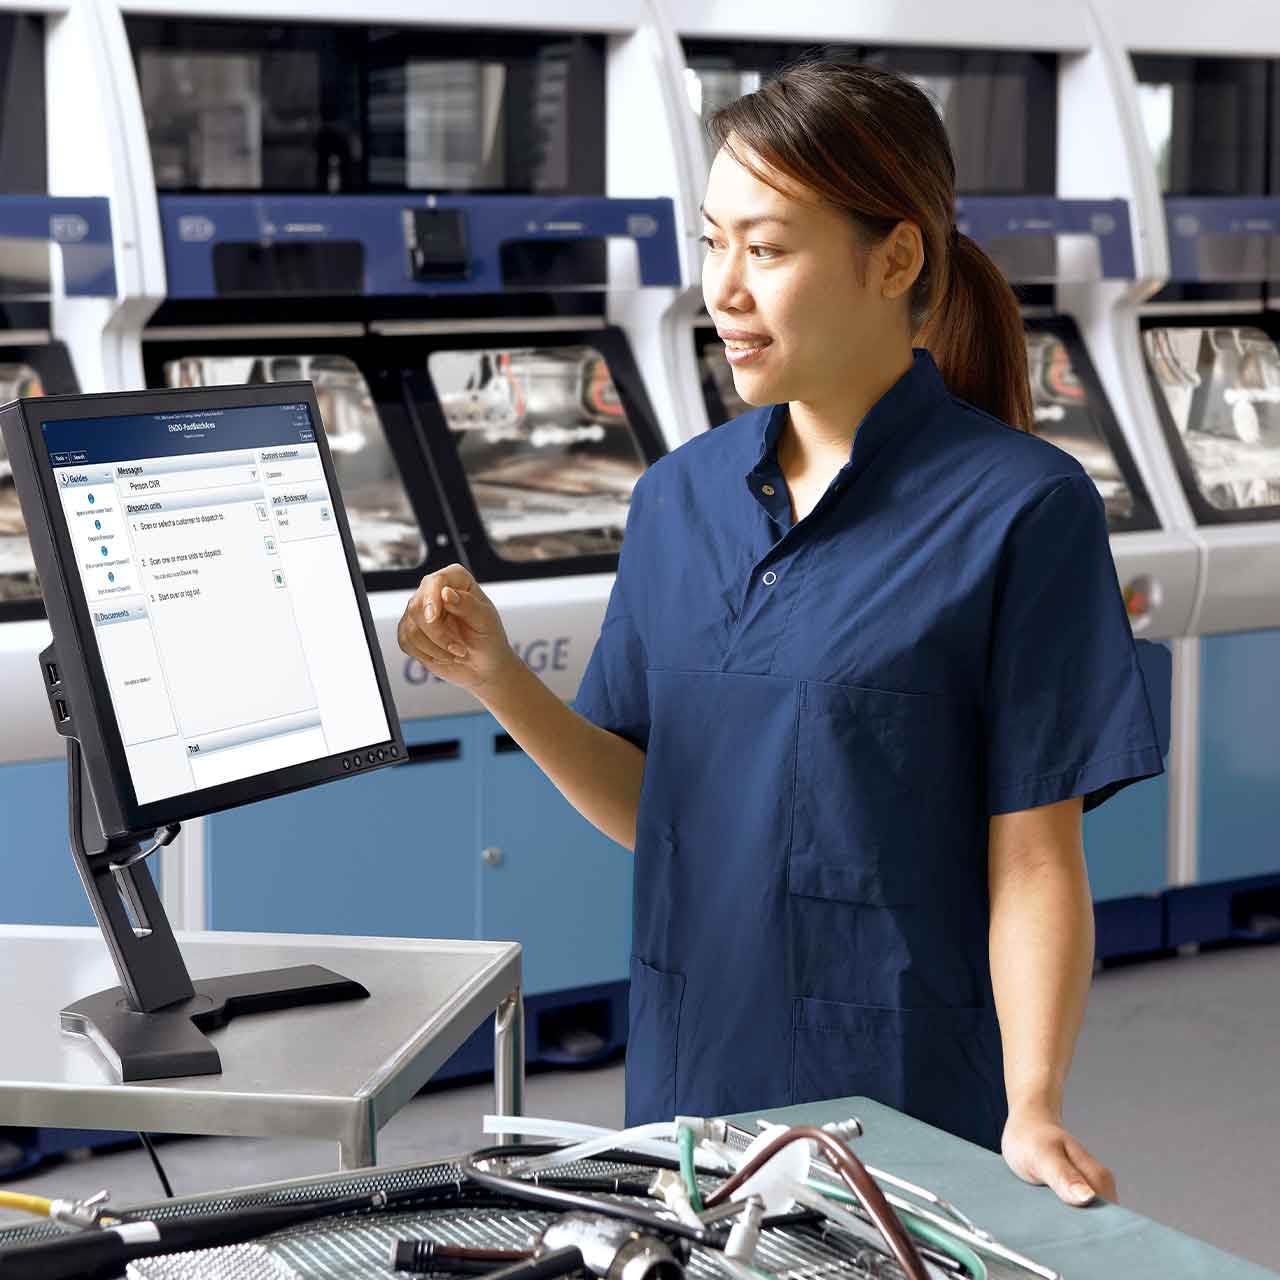 T-DOC Endo provides step-by-step user guidance during handling and reprocessing of endoscopes